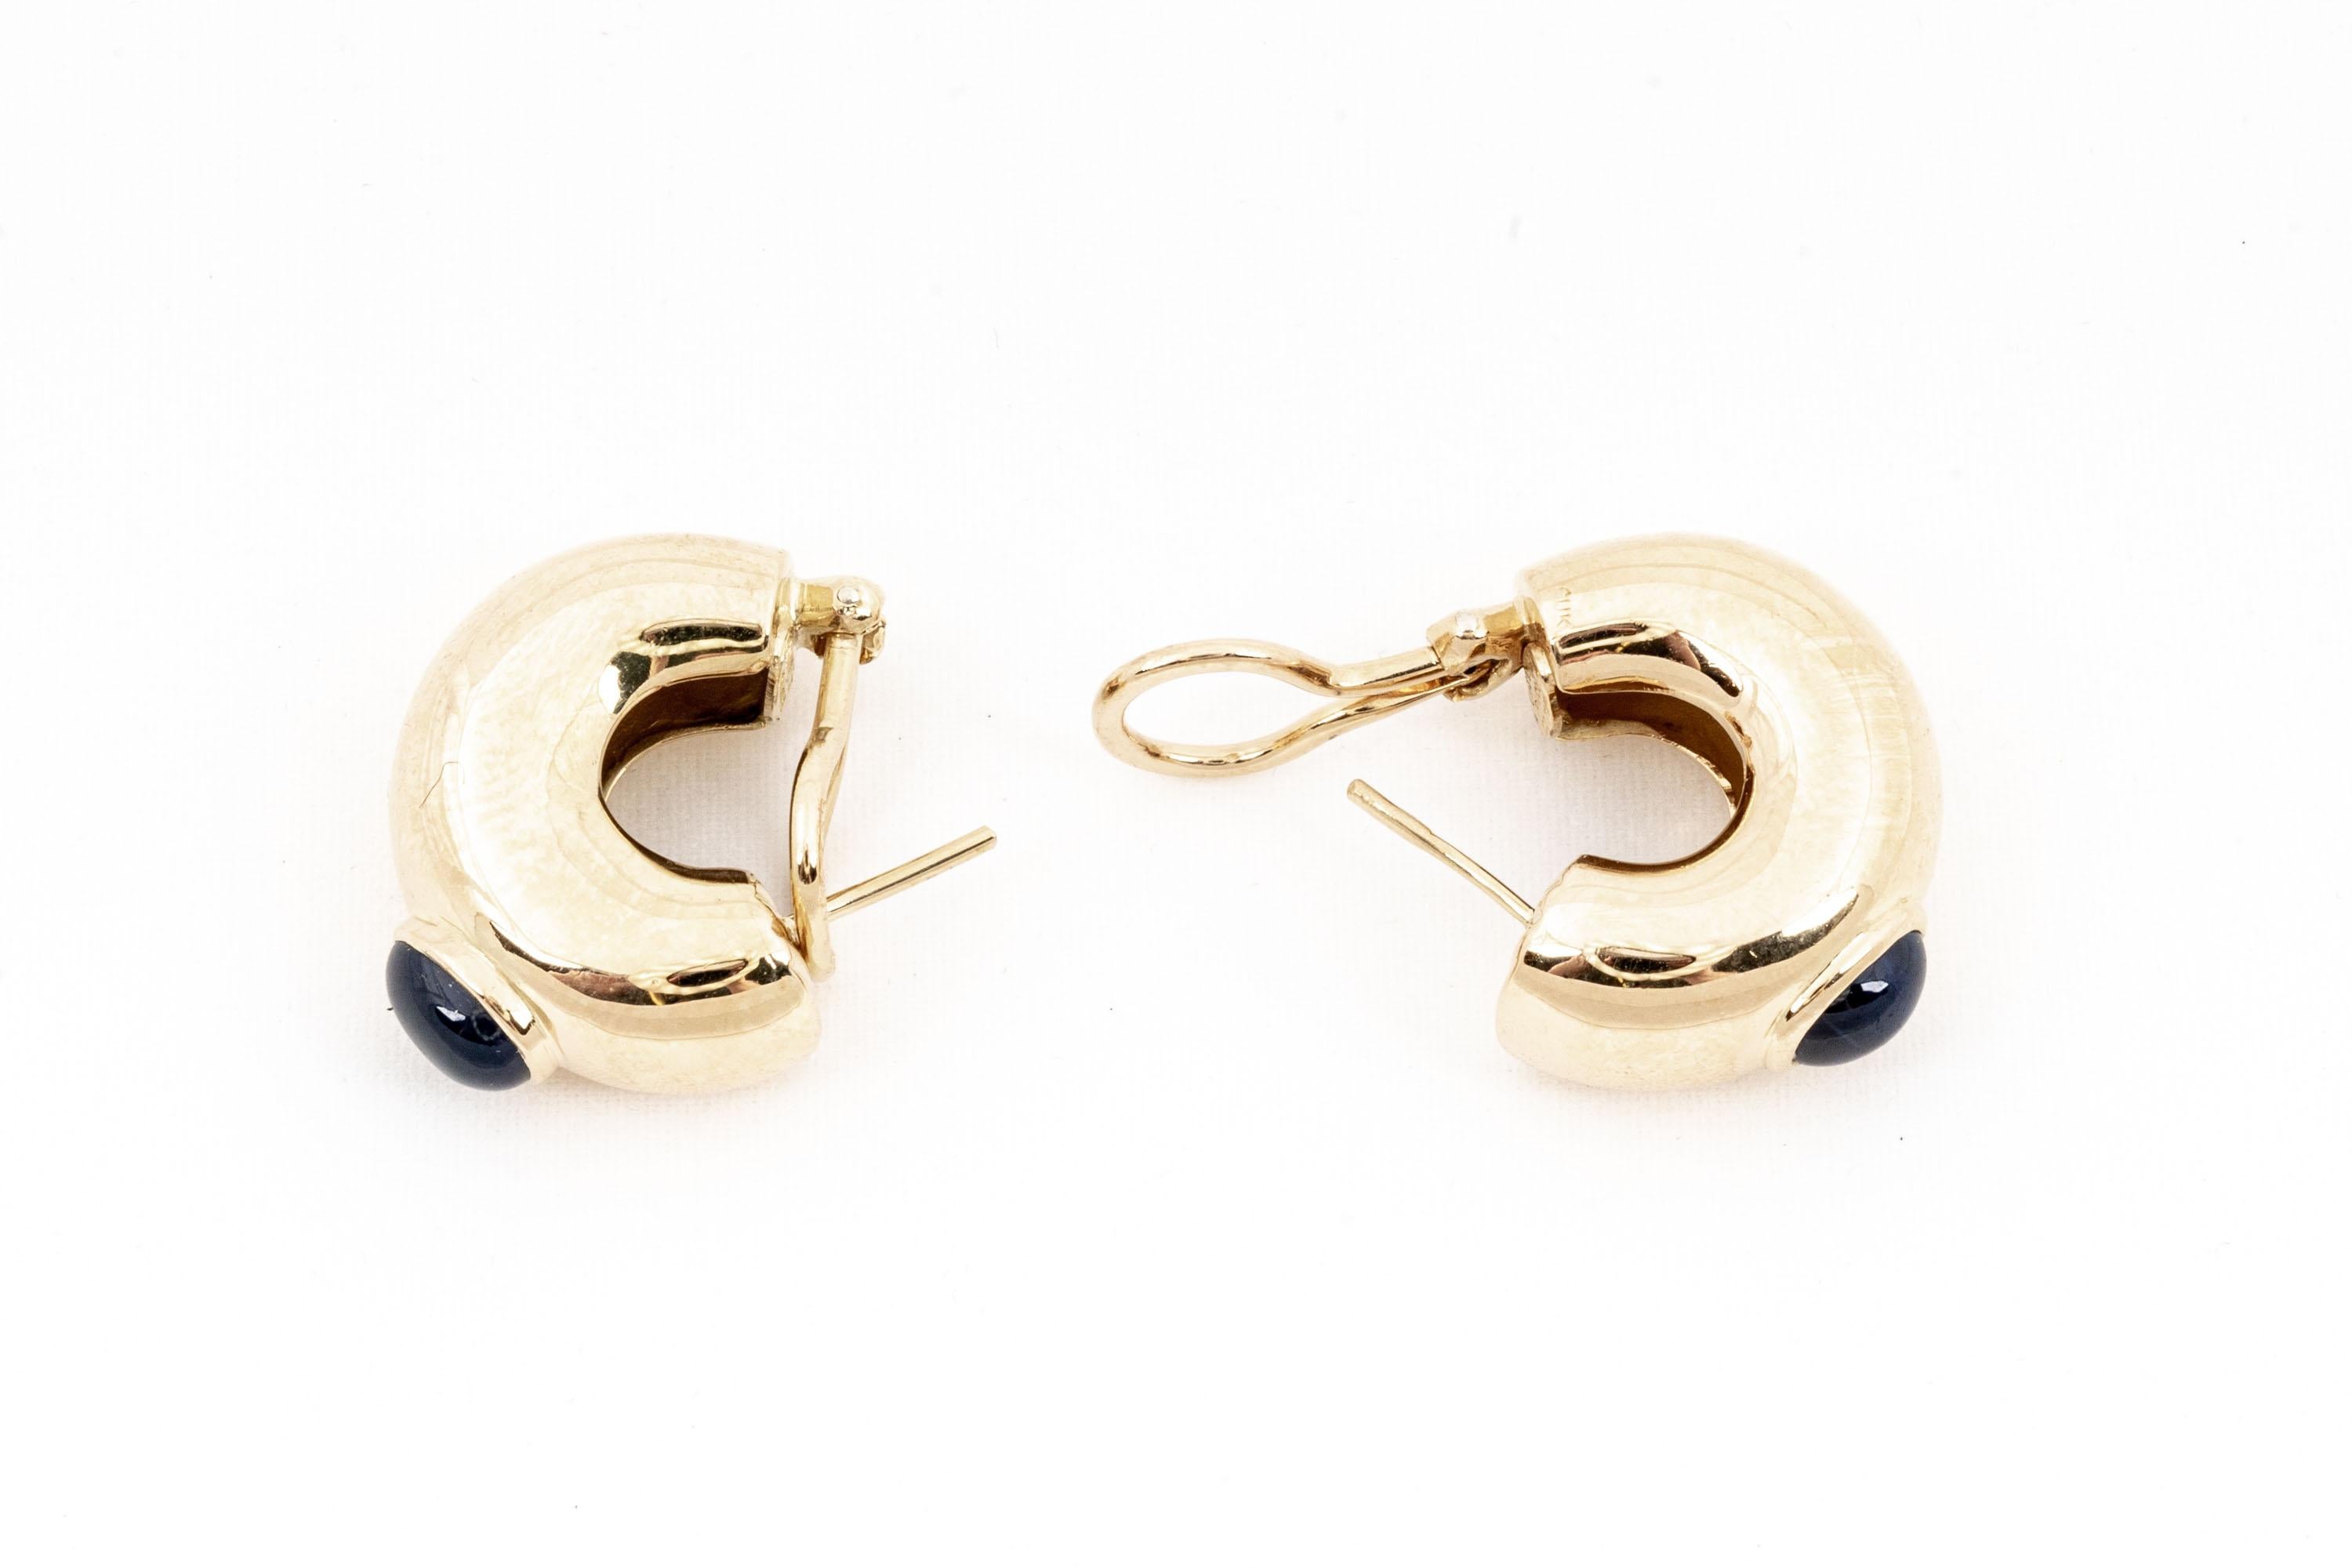 Cabochon Chaumet Paris 18k Yellow Gold Chunky Sapphire Cabachon Hoop Earrings